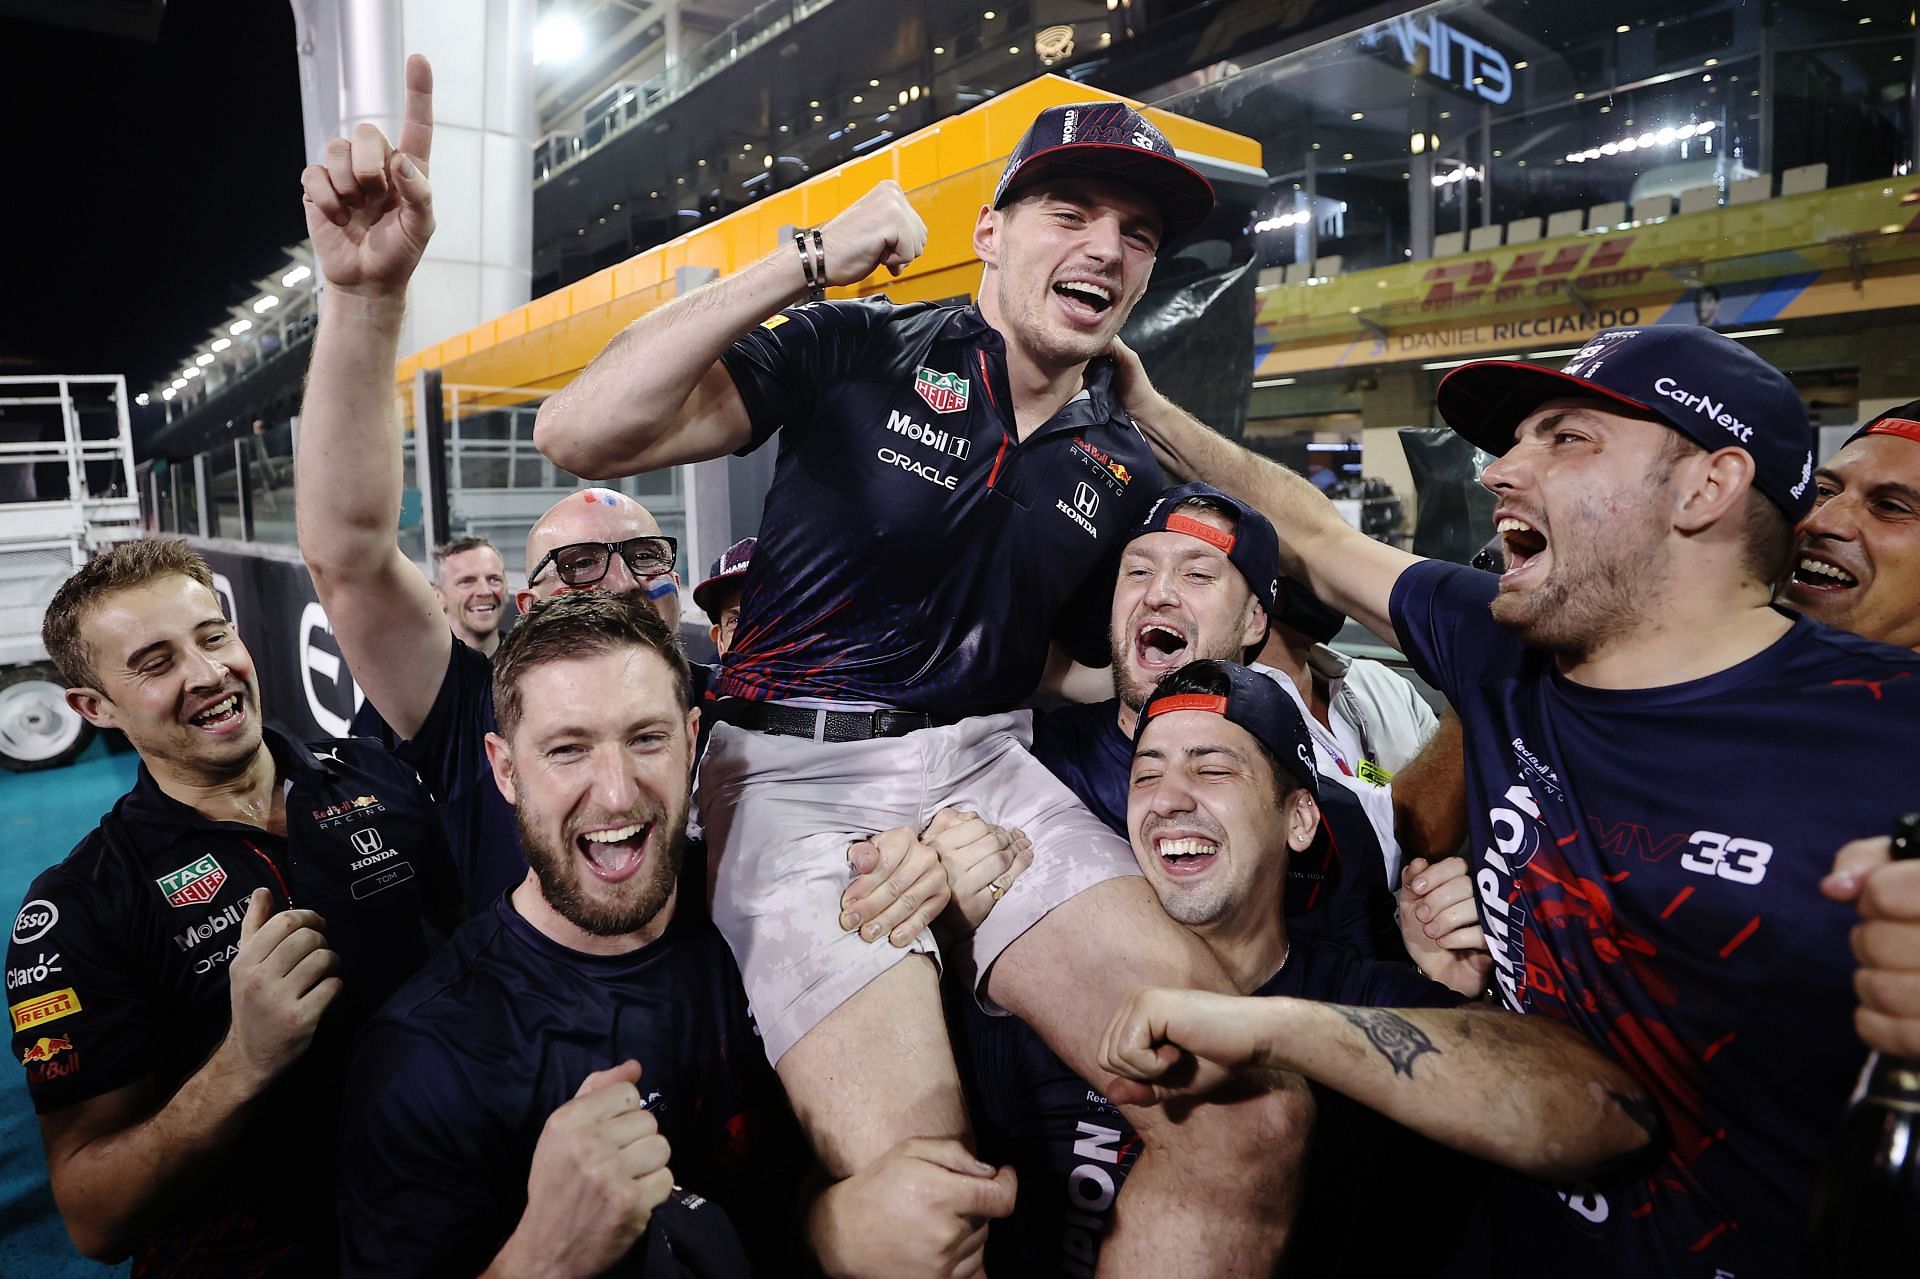 Race winner and 2021 F1 World Drivers Champion Max Verstappen celebrates with his team after the F1 Abu Dhabi GP. (Photo by Lars Baron/Getty Images)